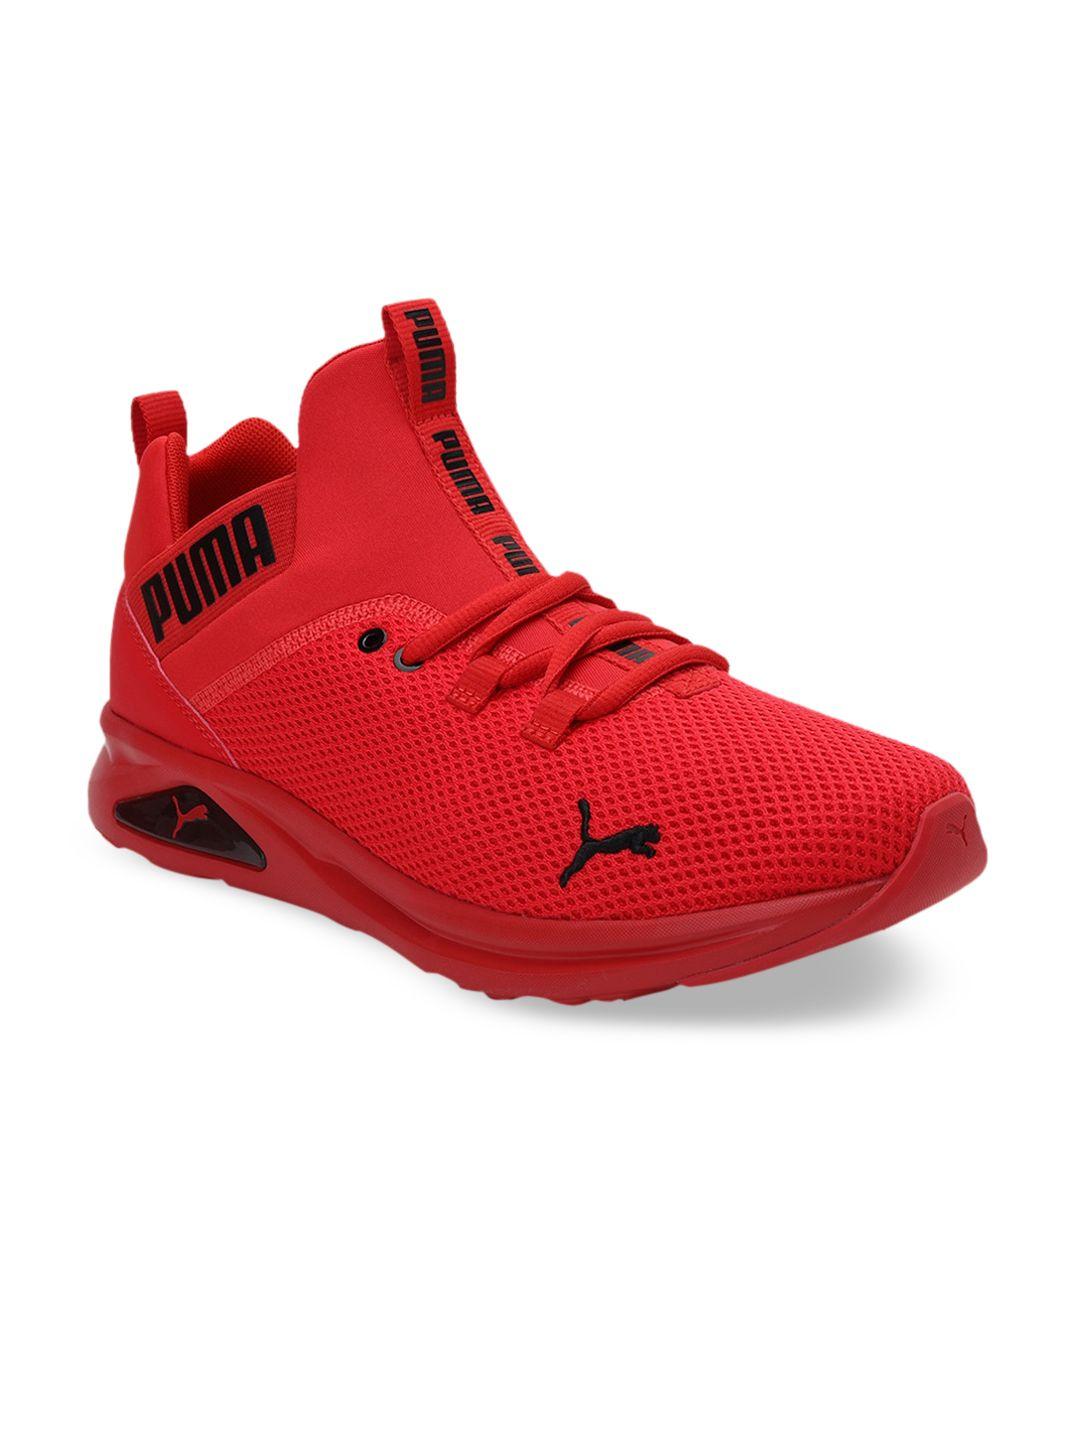 puma men red & black enzo 2 uncaged running shoes